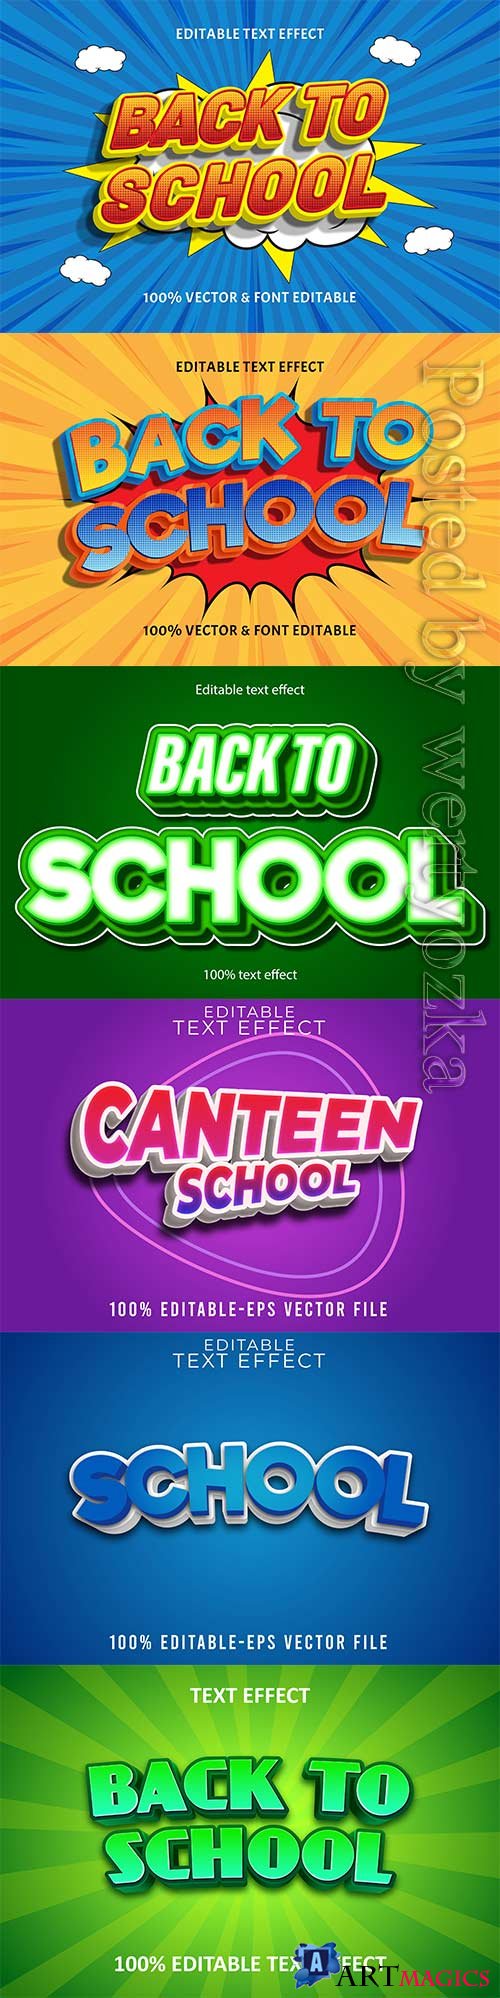 Back to school editable text effect vol 14